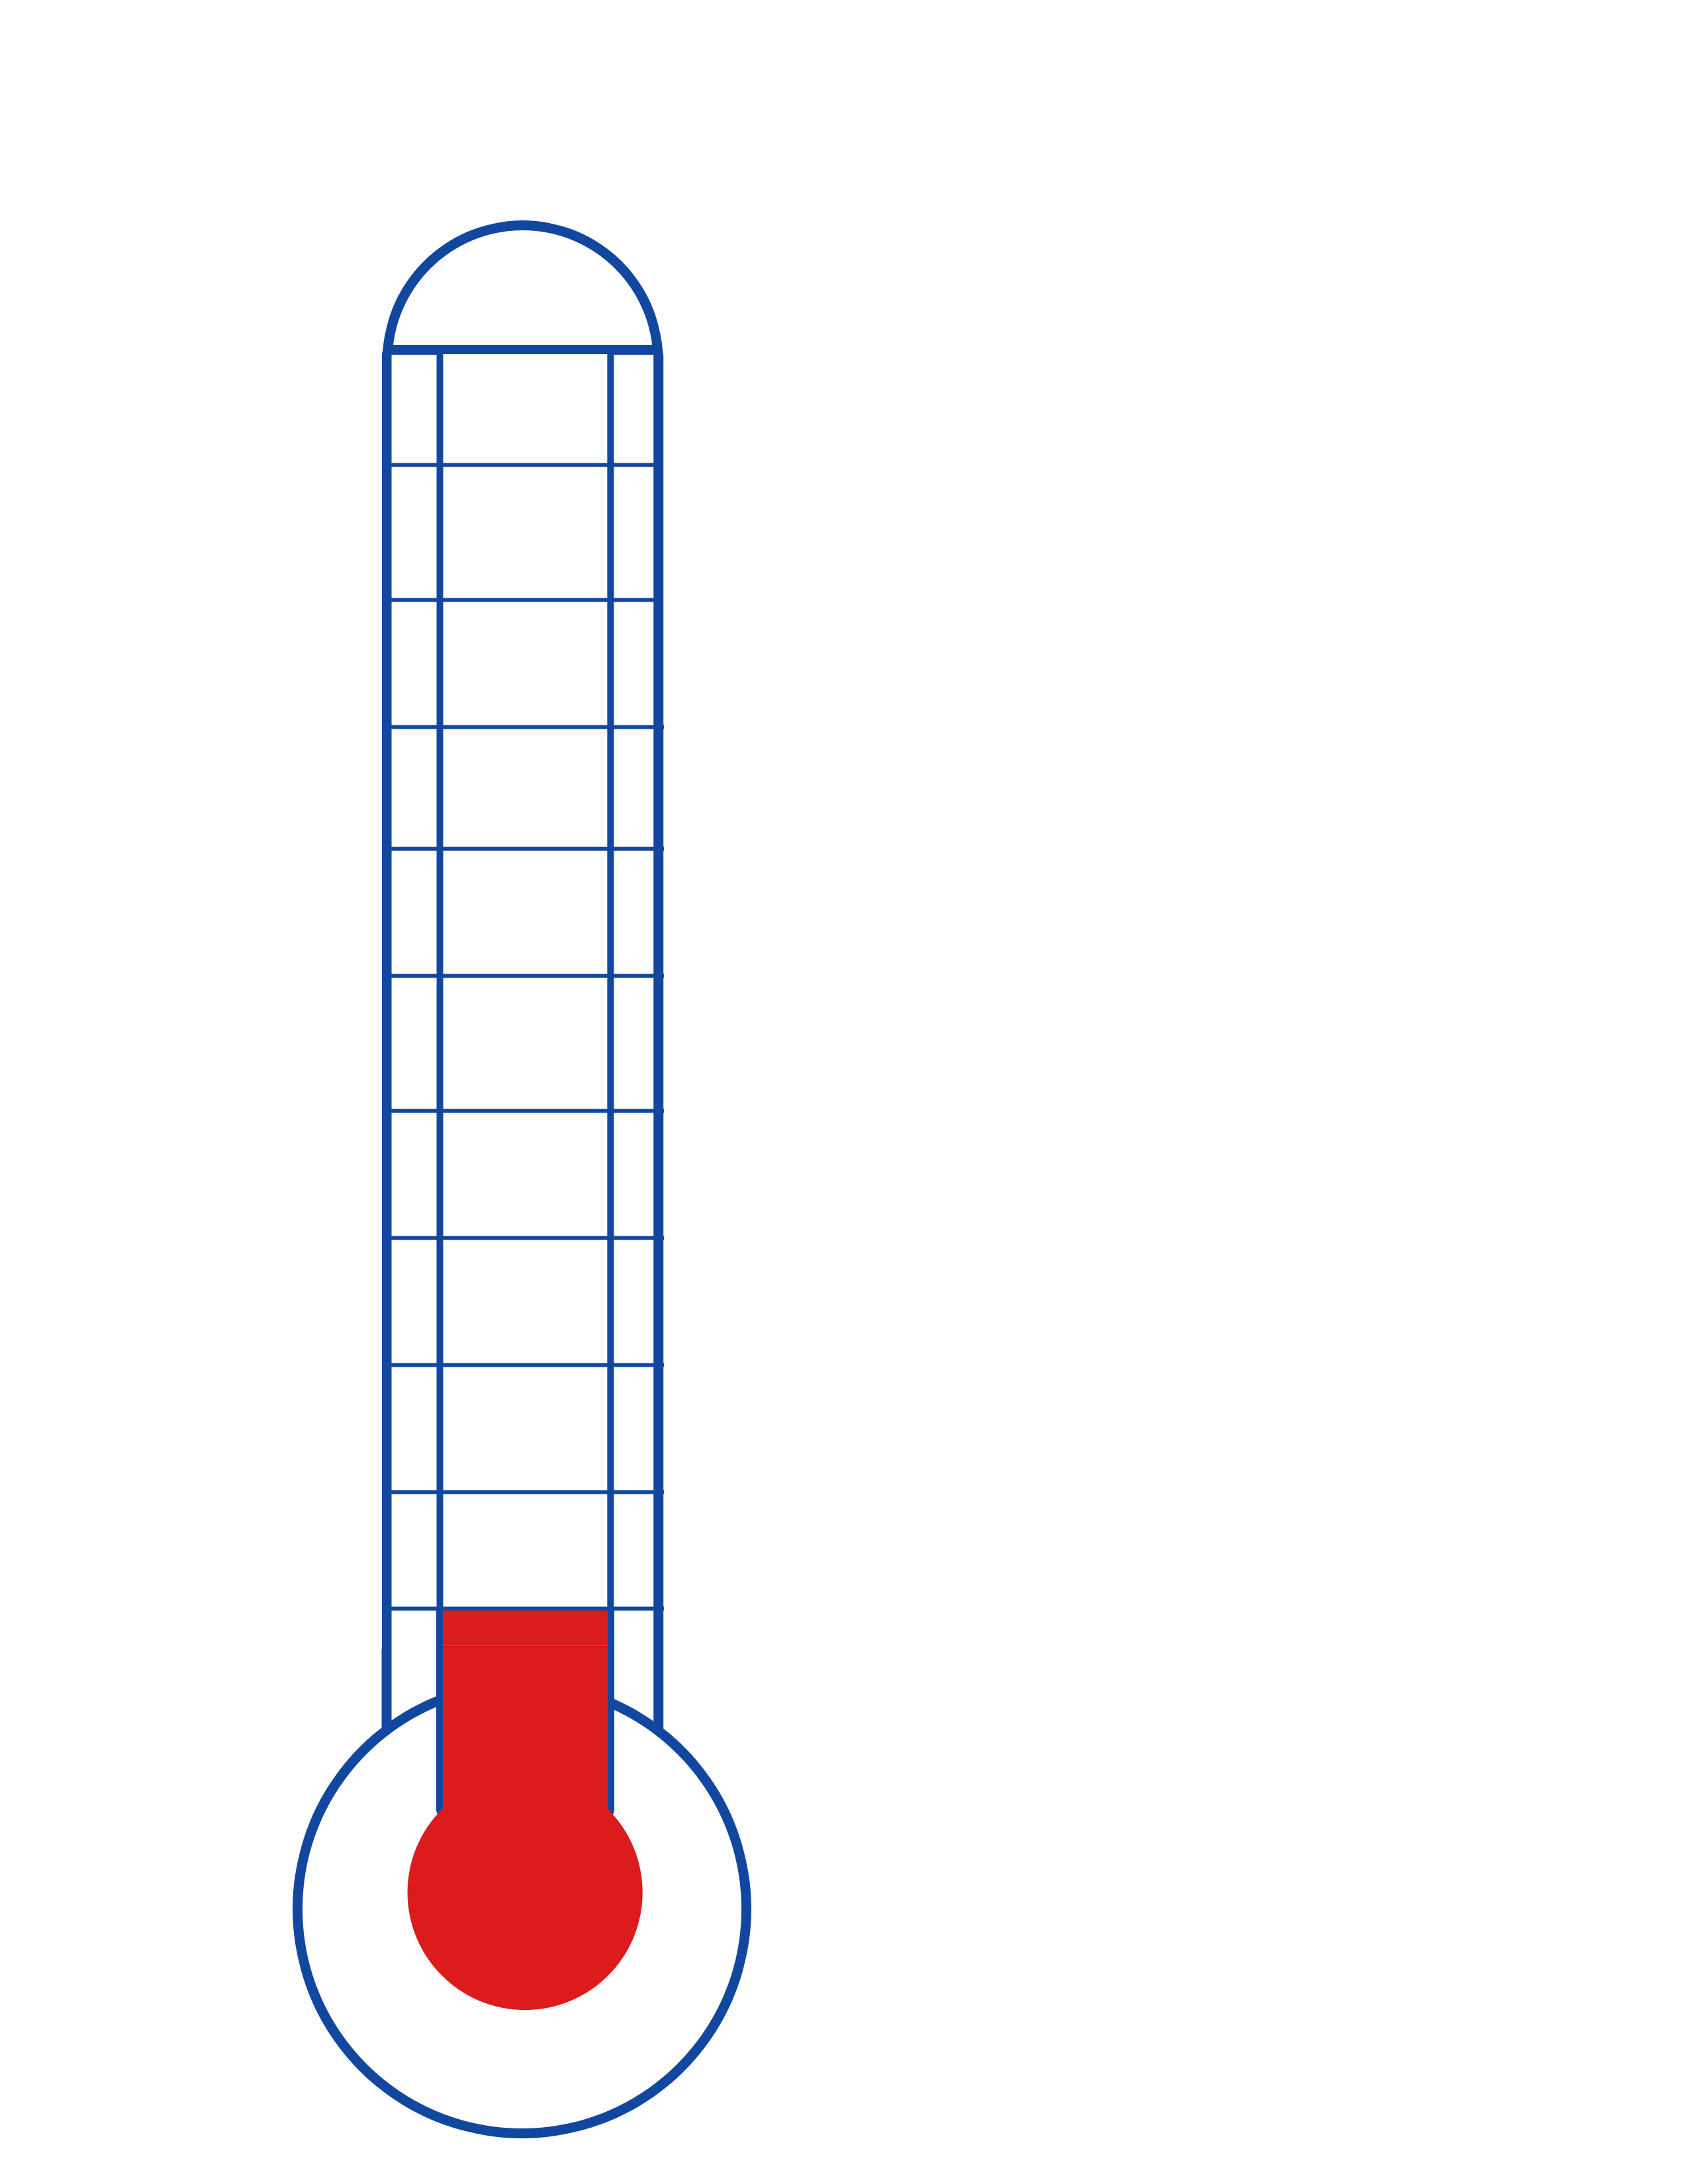 Printable fundraising thermometer clipart